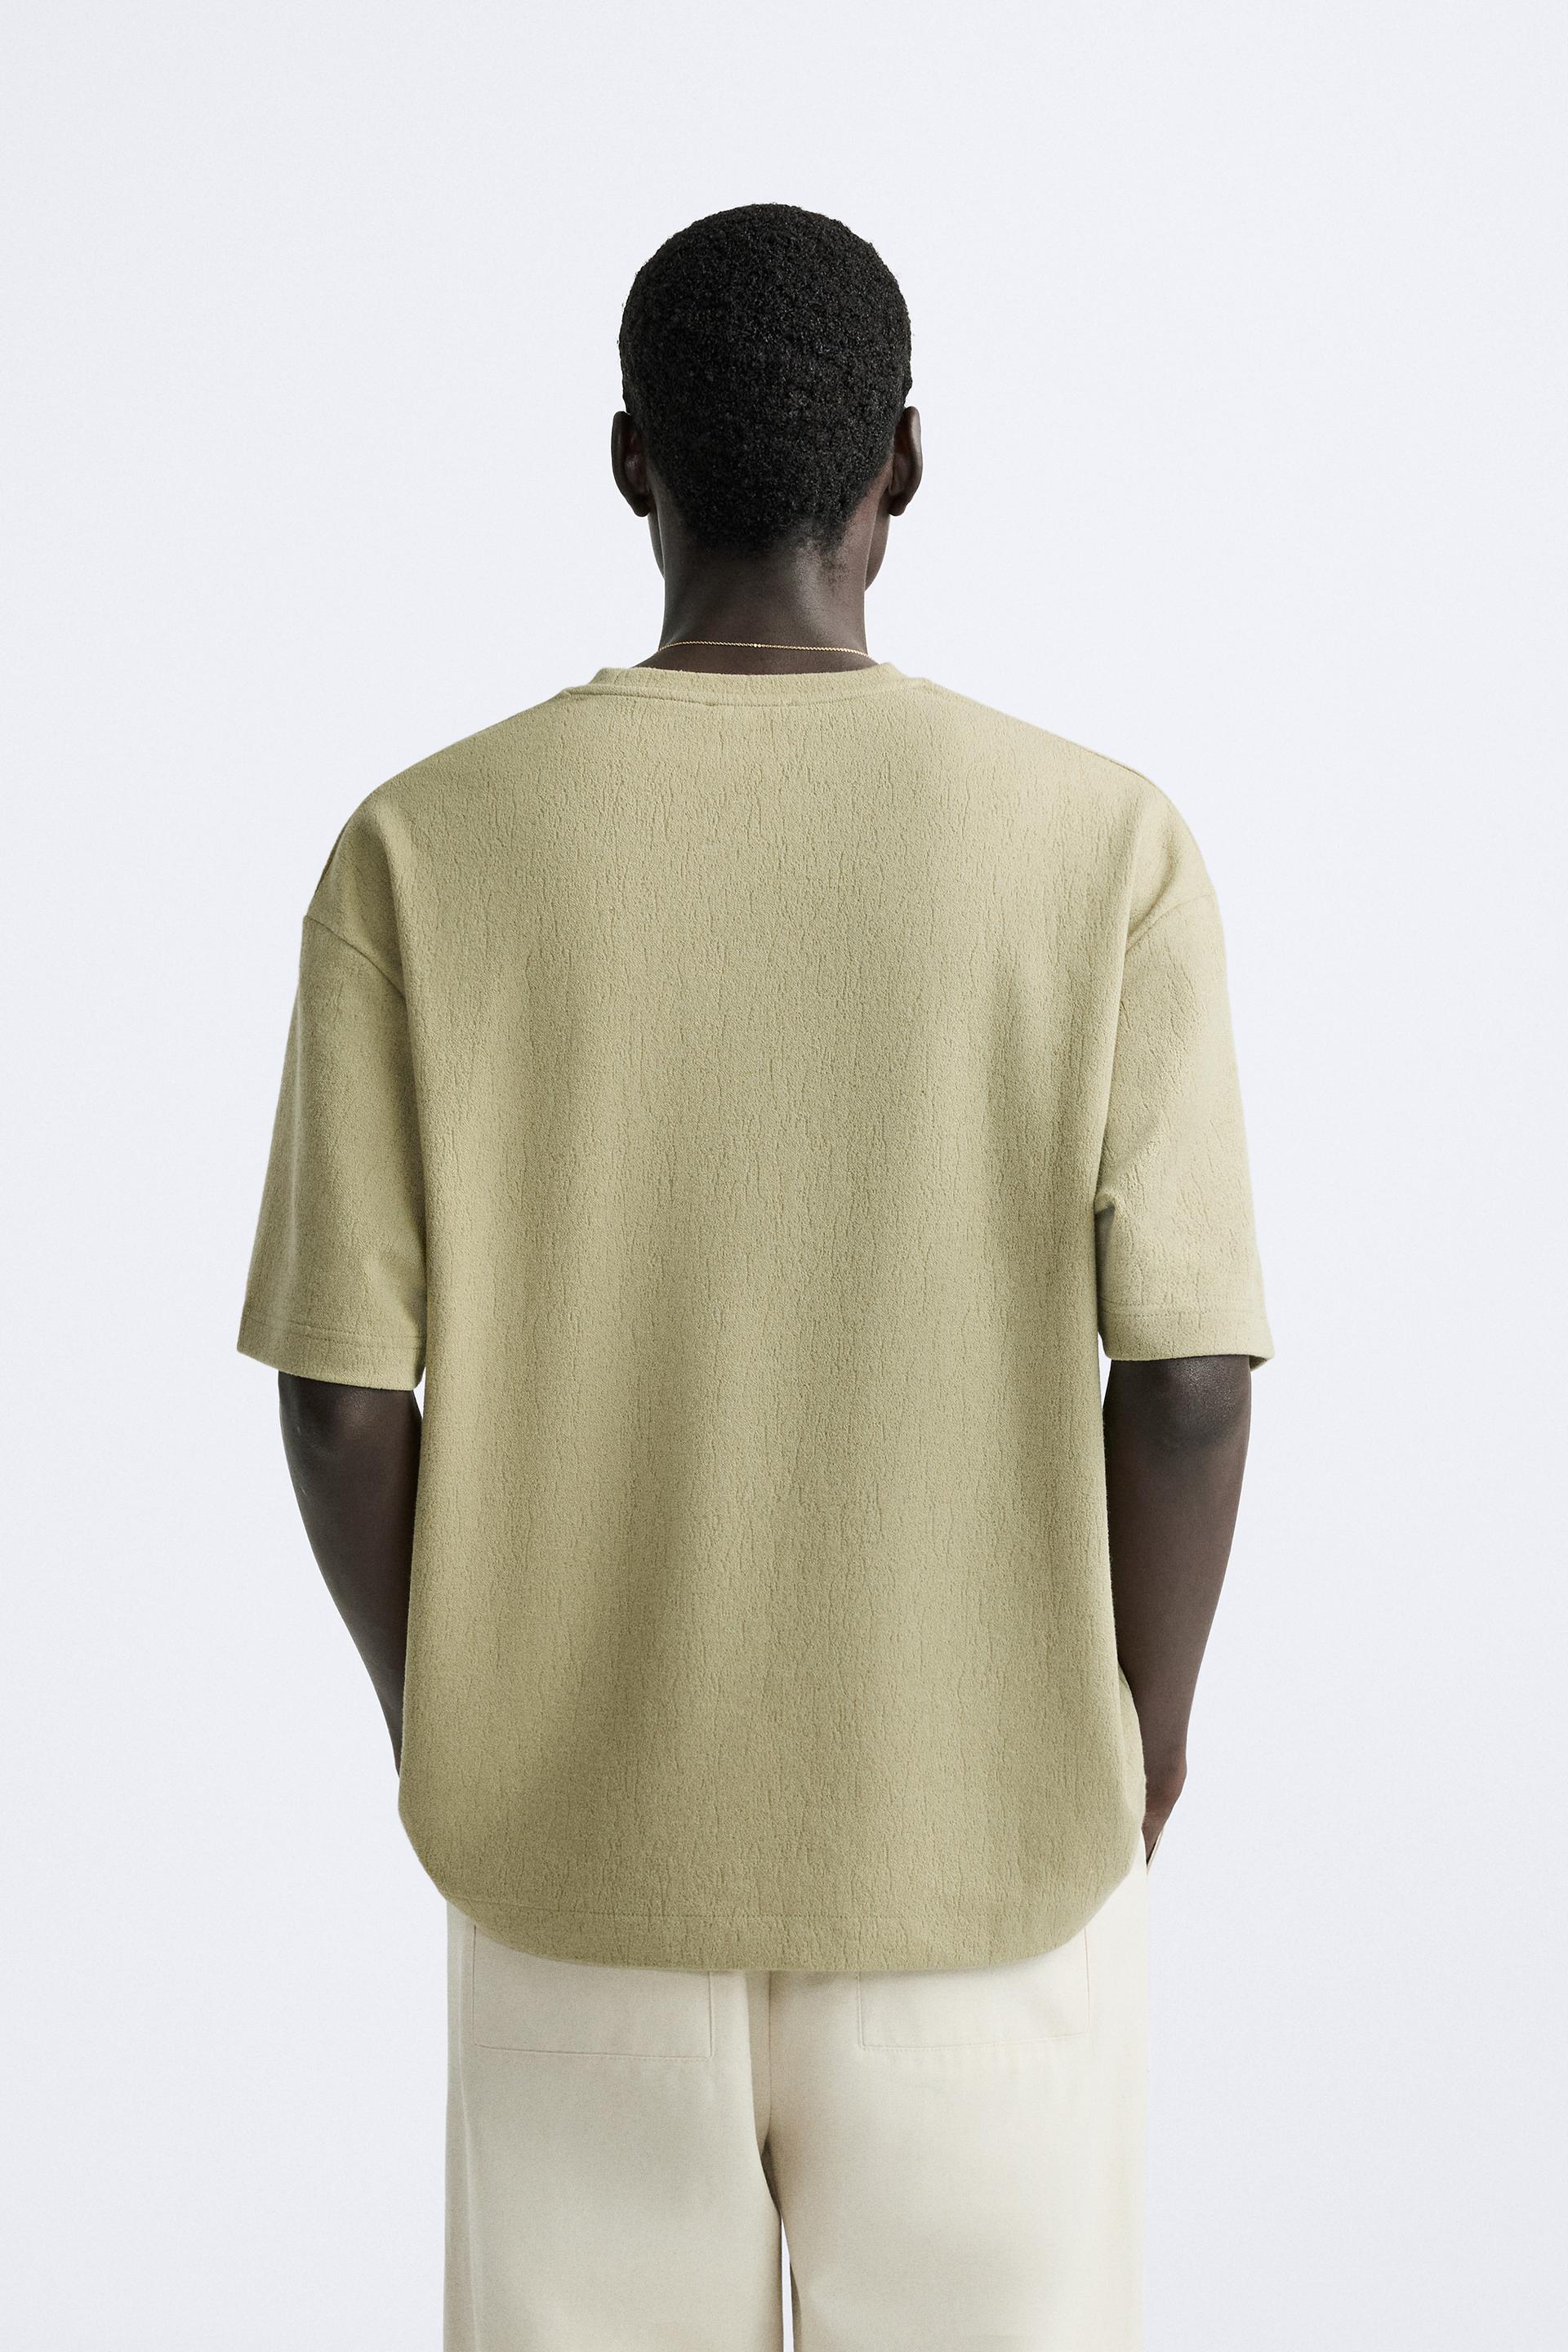 TEXTURED T-SHIRT - Oyster-white